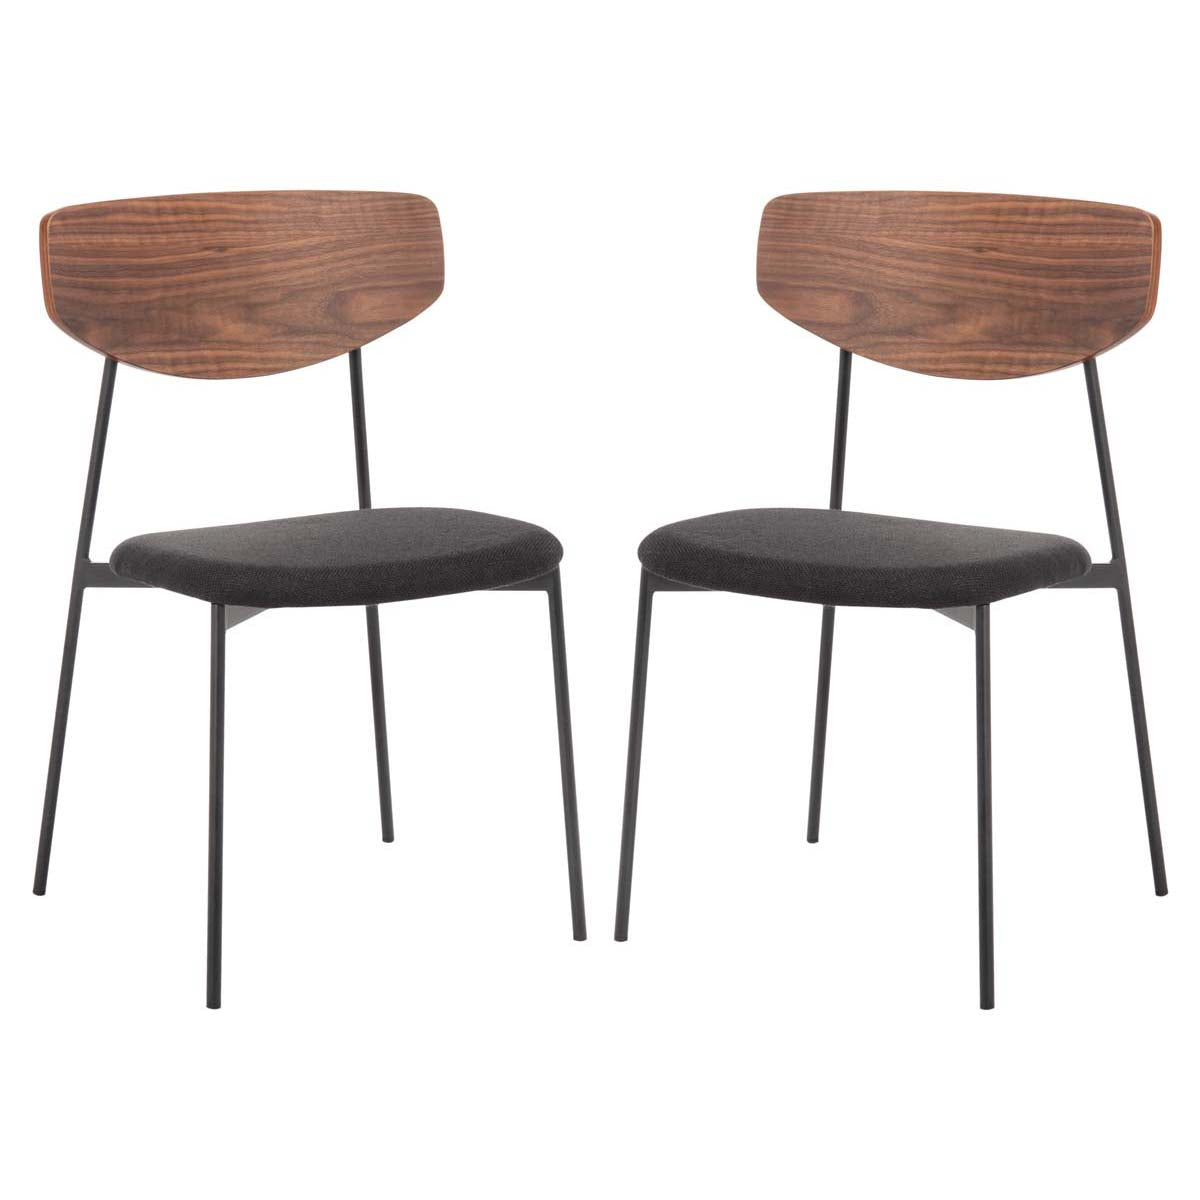 Safavieh Ryker Dining Chairs, Set of 2 , DCH3007